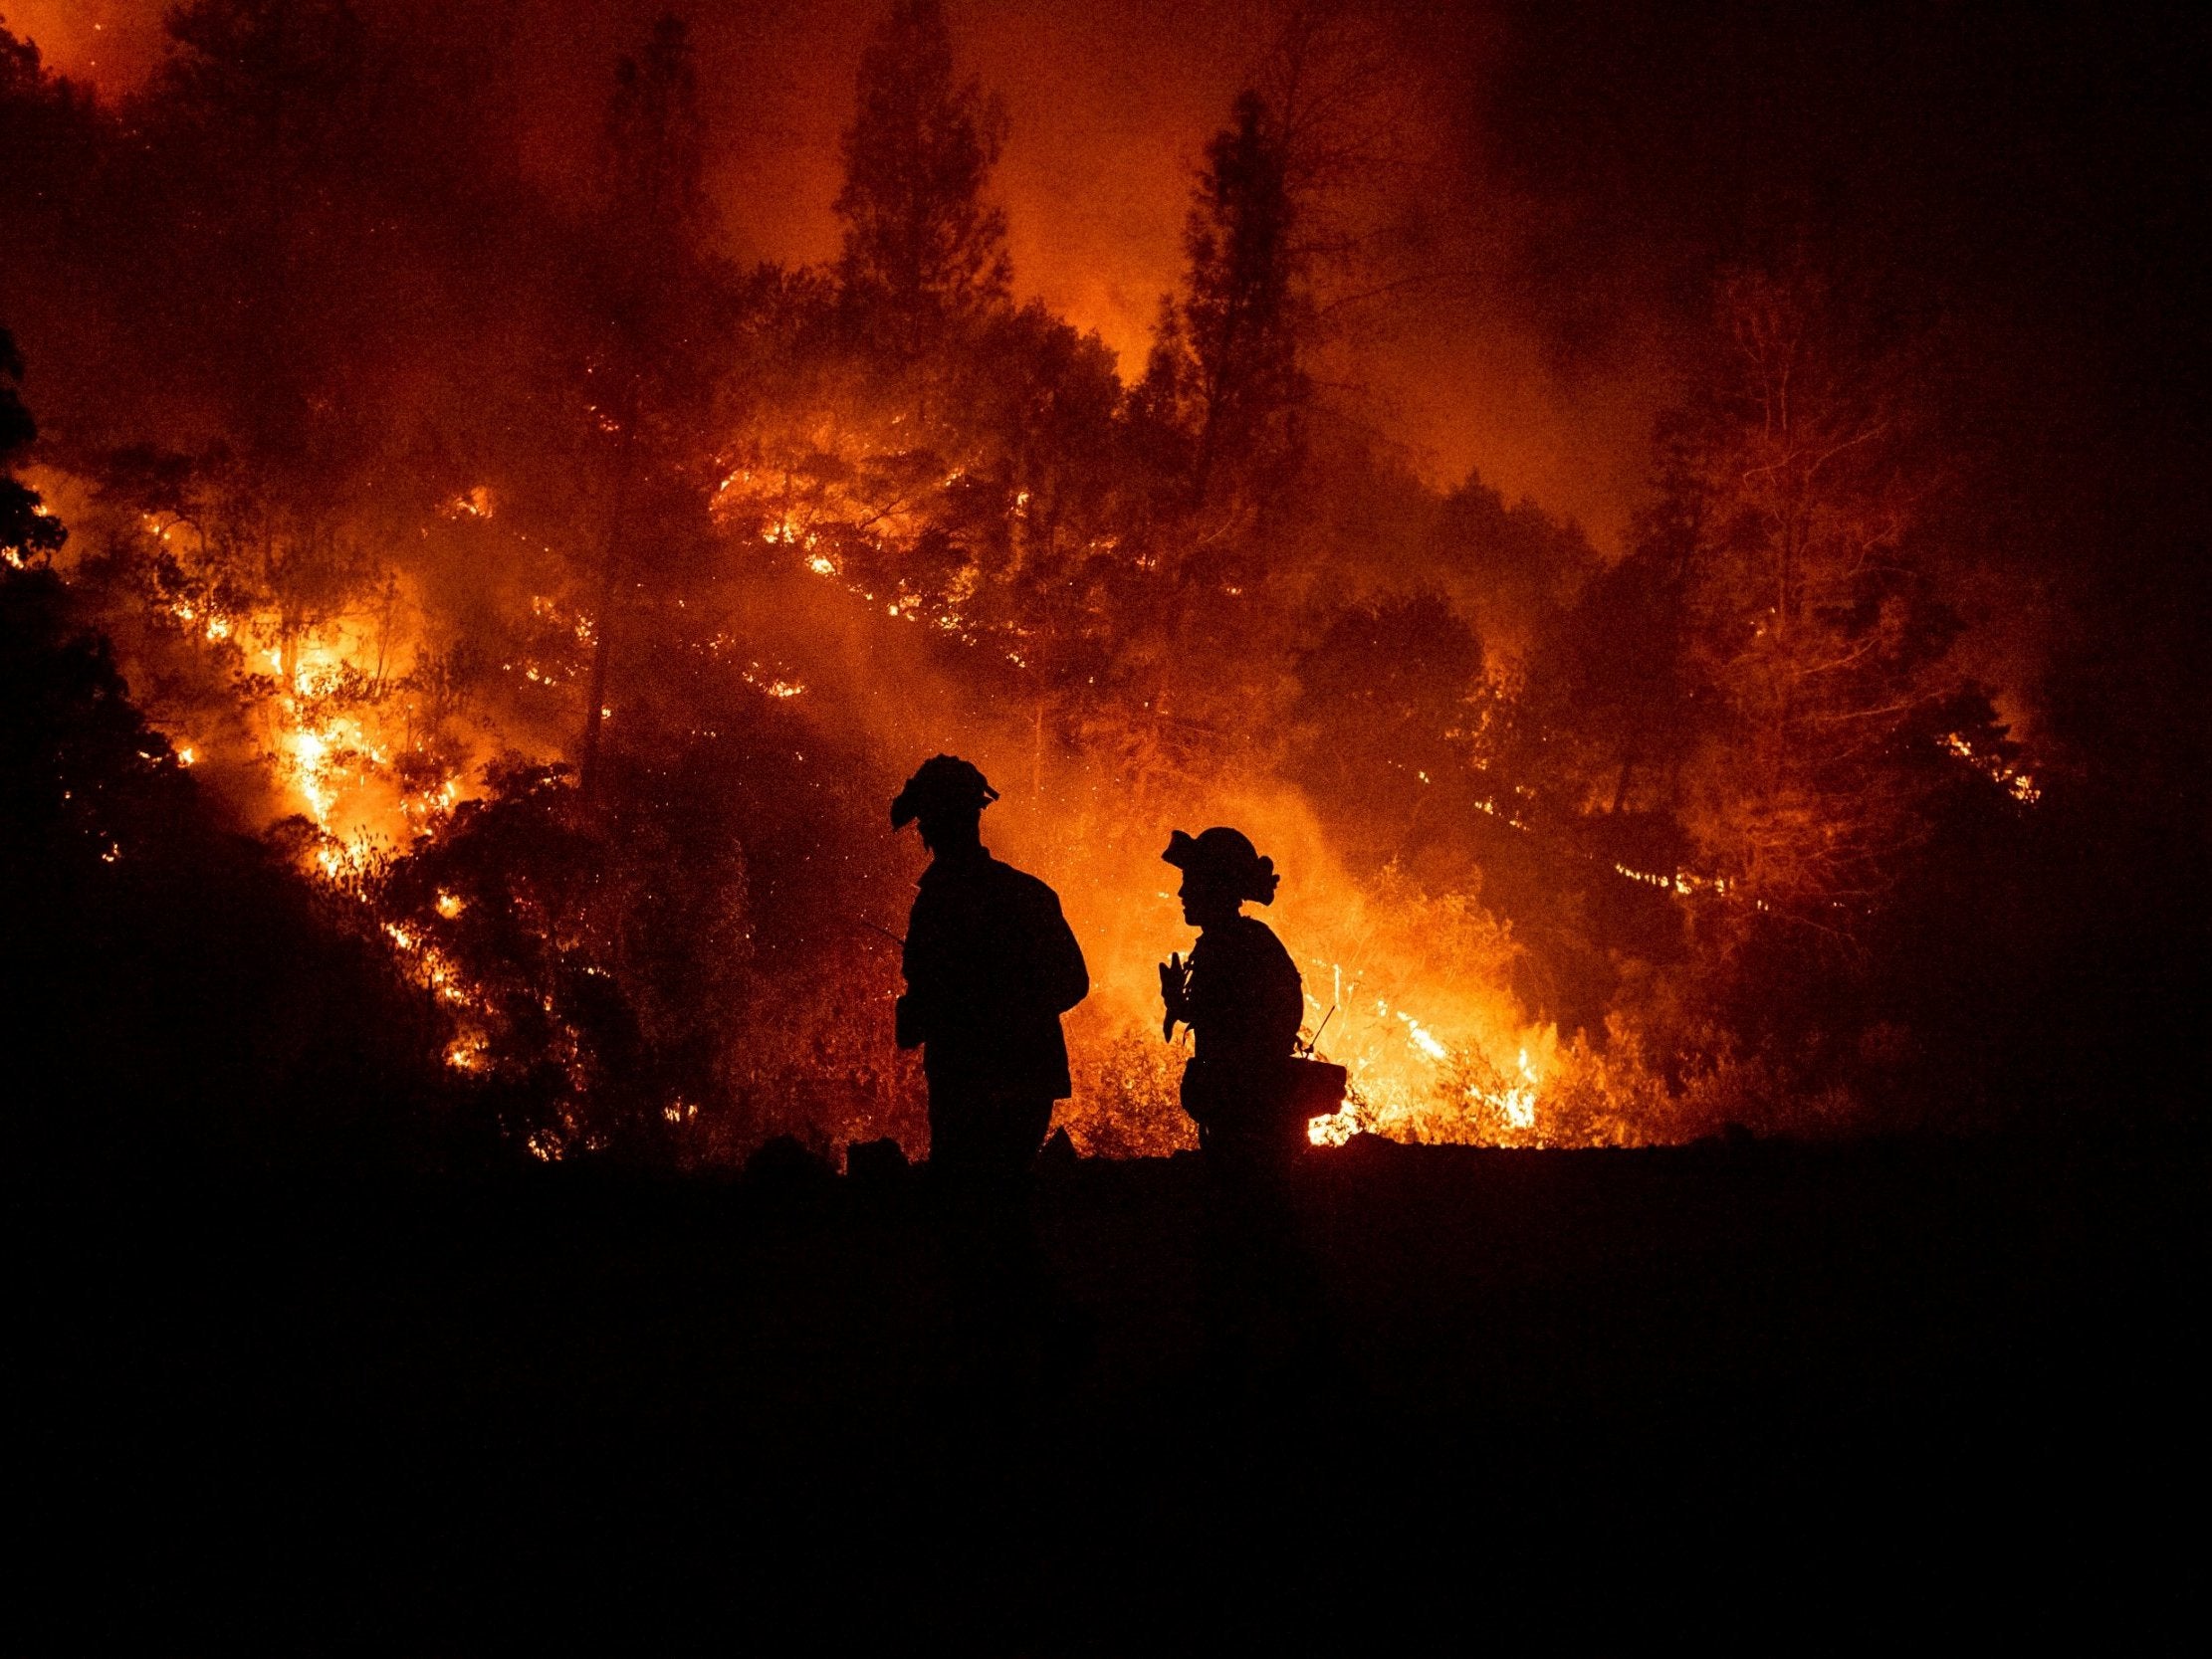 Two other wildfires in Northern California have claimed five other firefighters and six other lives